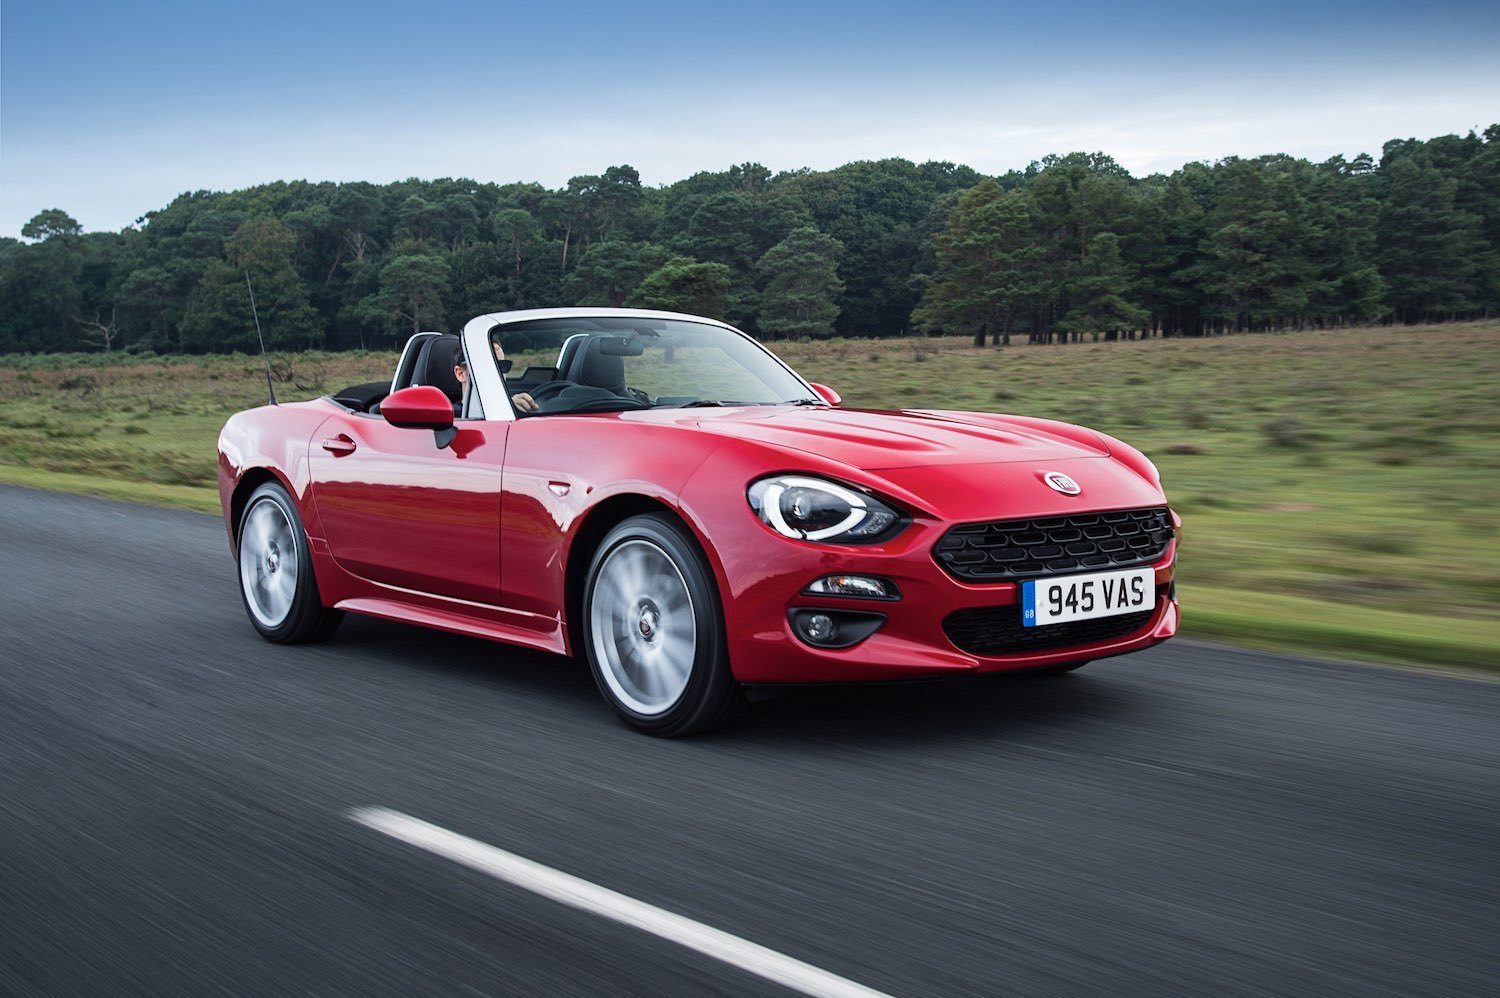 Tom Scanlan reviews the Fiat 124 Spider for Drive 2